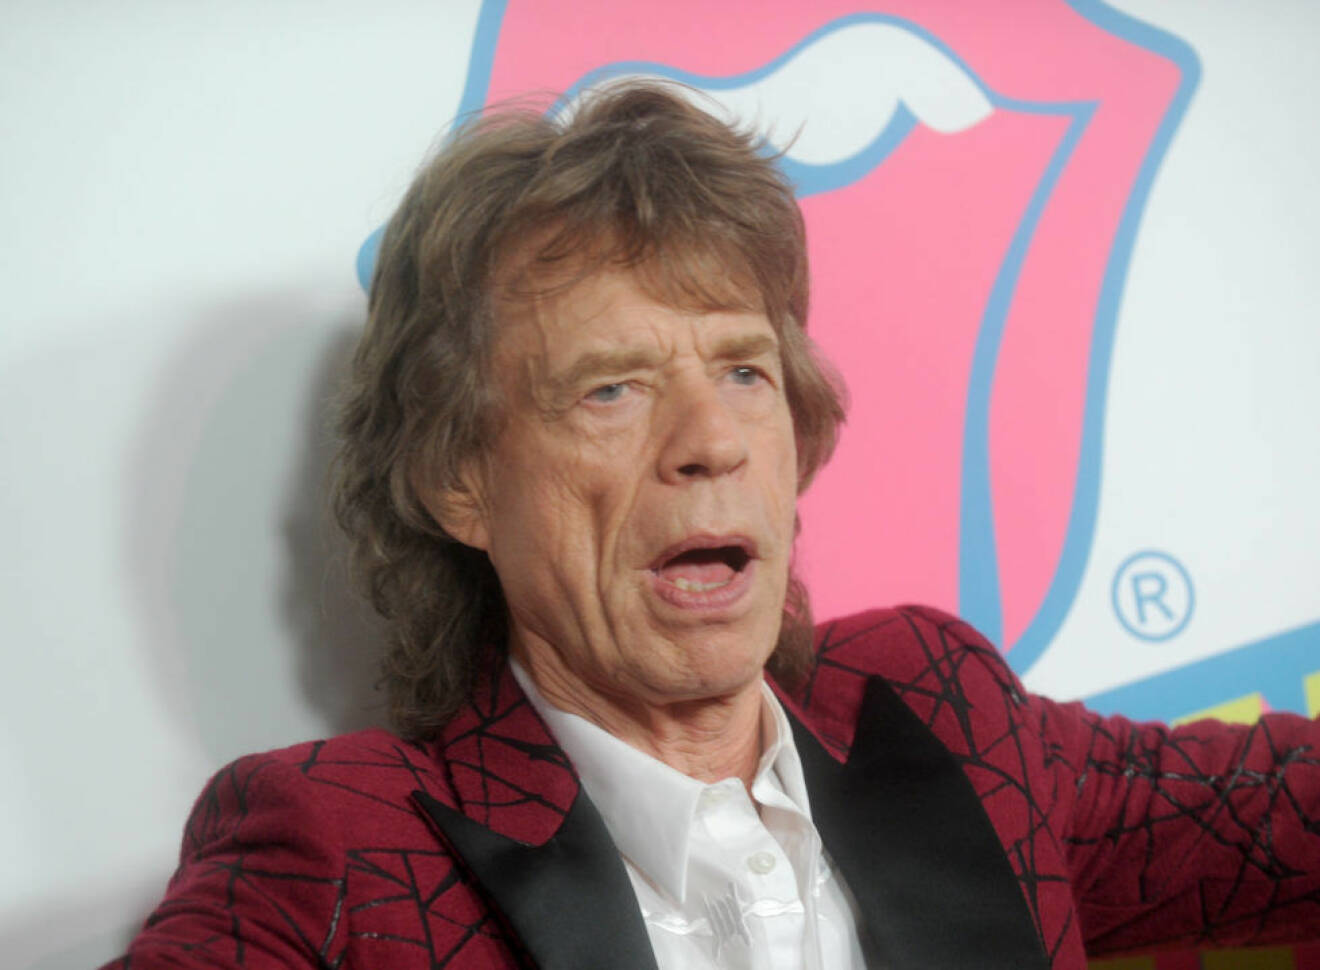 Mick Jagger attends The Rolling Stones exhibitionism opening night at Industria Super Studio